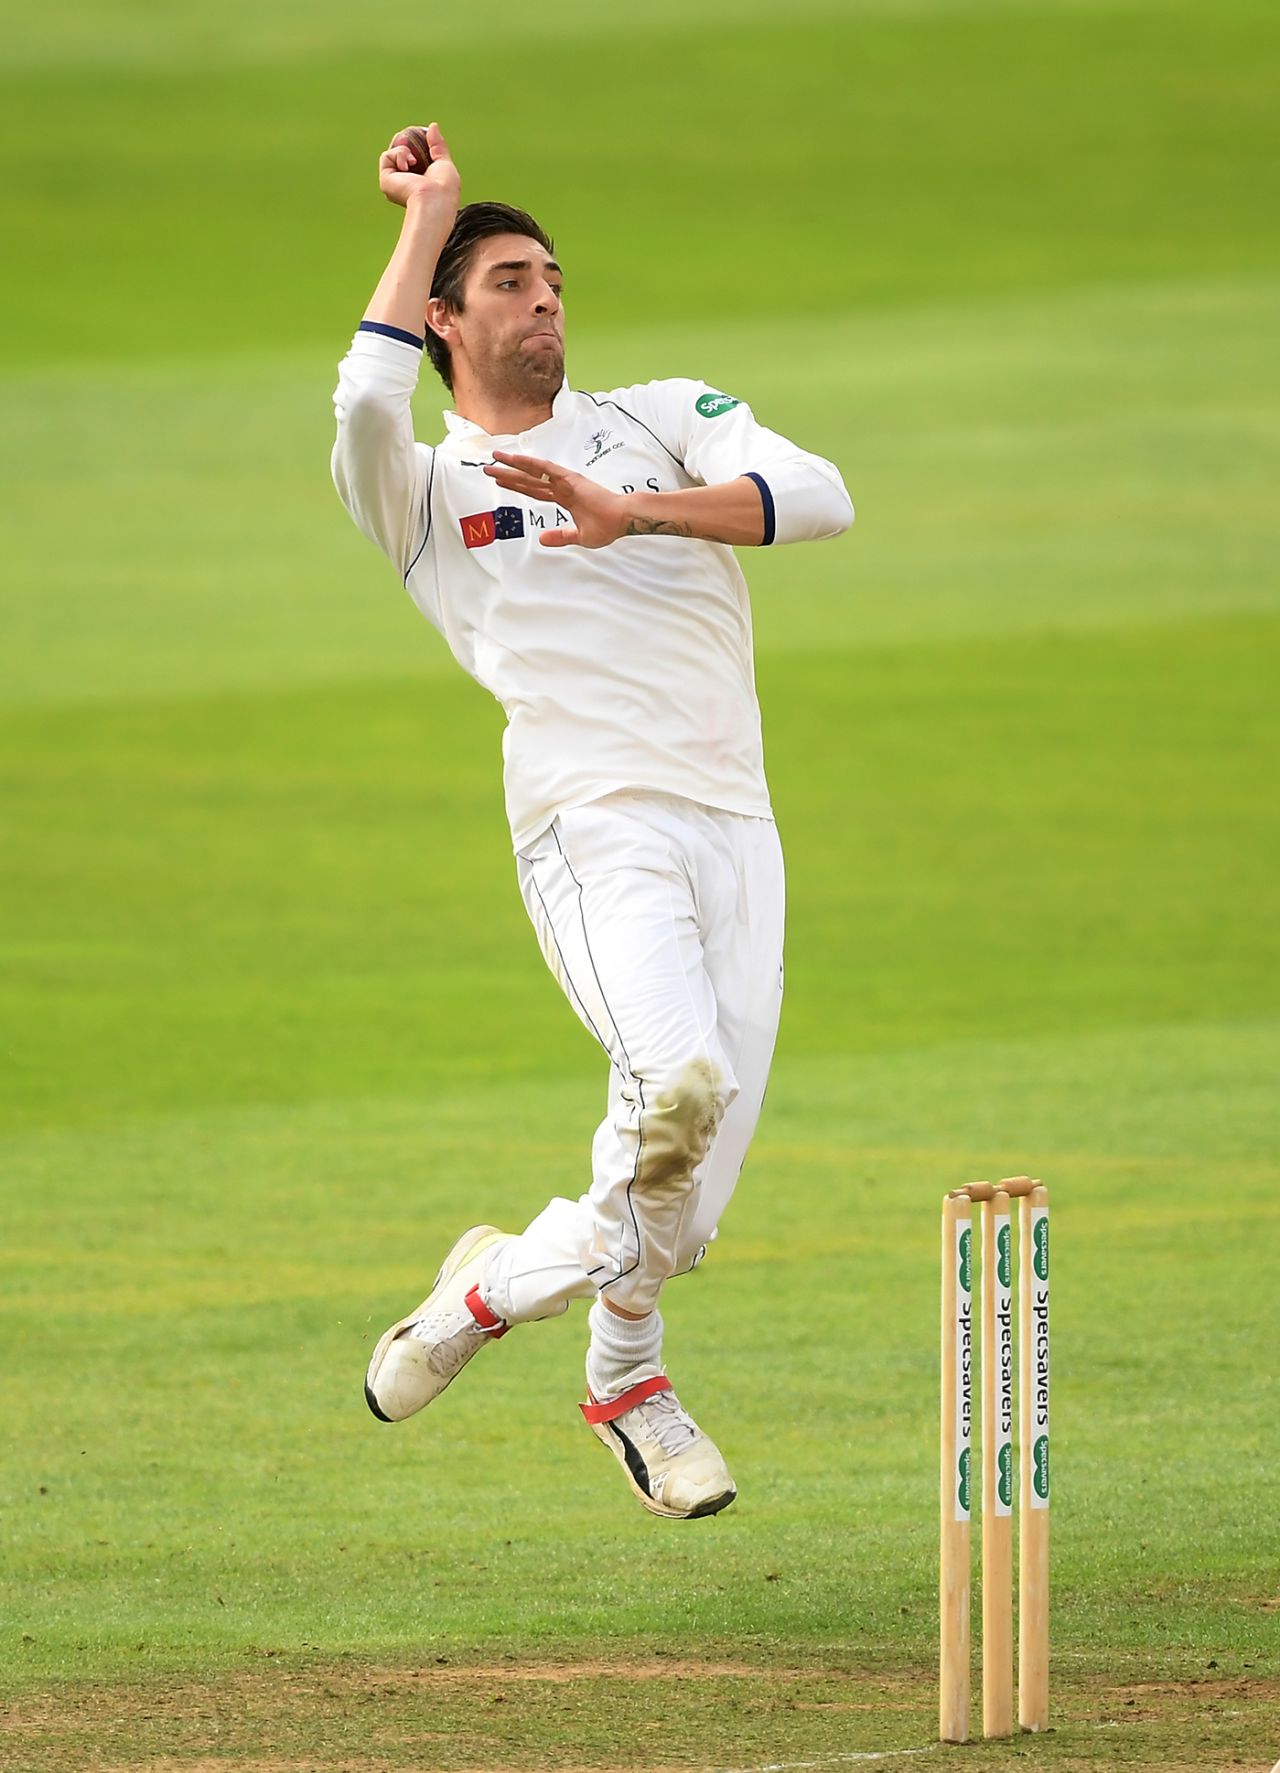 Duanne Olivier gets into his delivery stride, Somerset v Yorkshire, Specsavers County Championship, Taunton, September 10, 2019